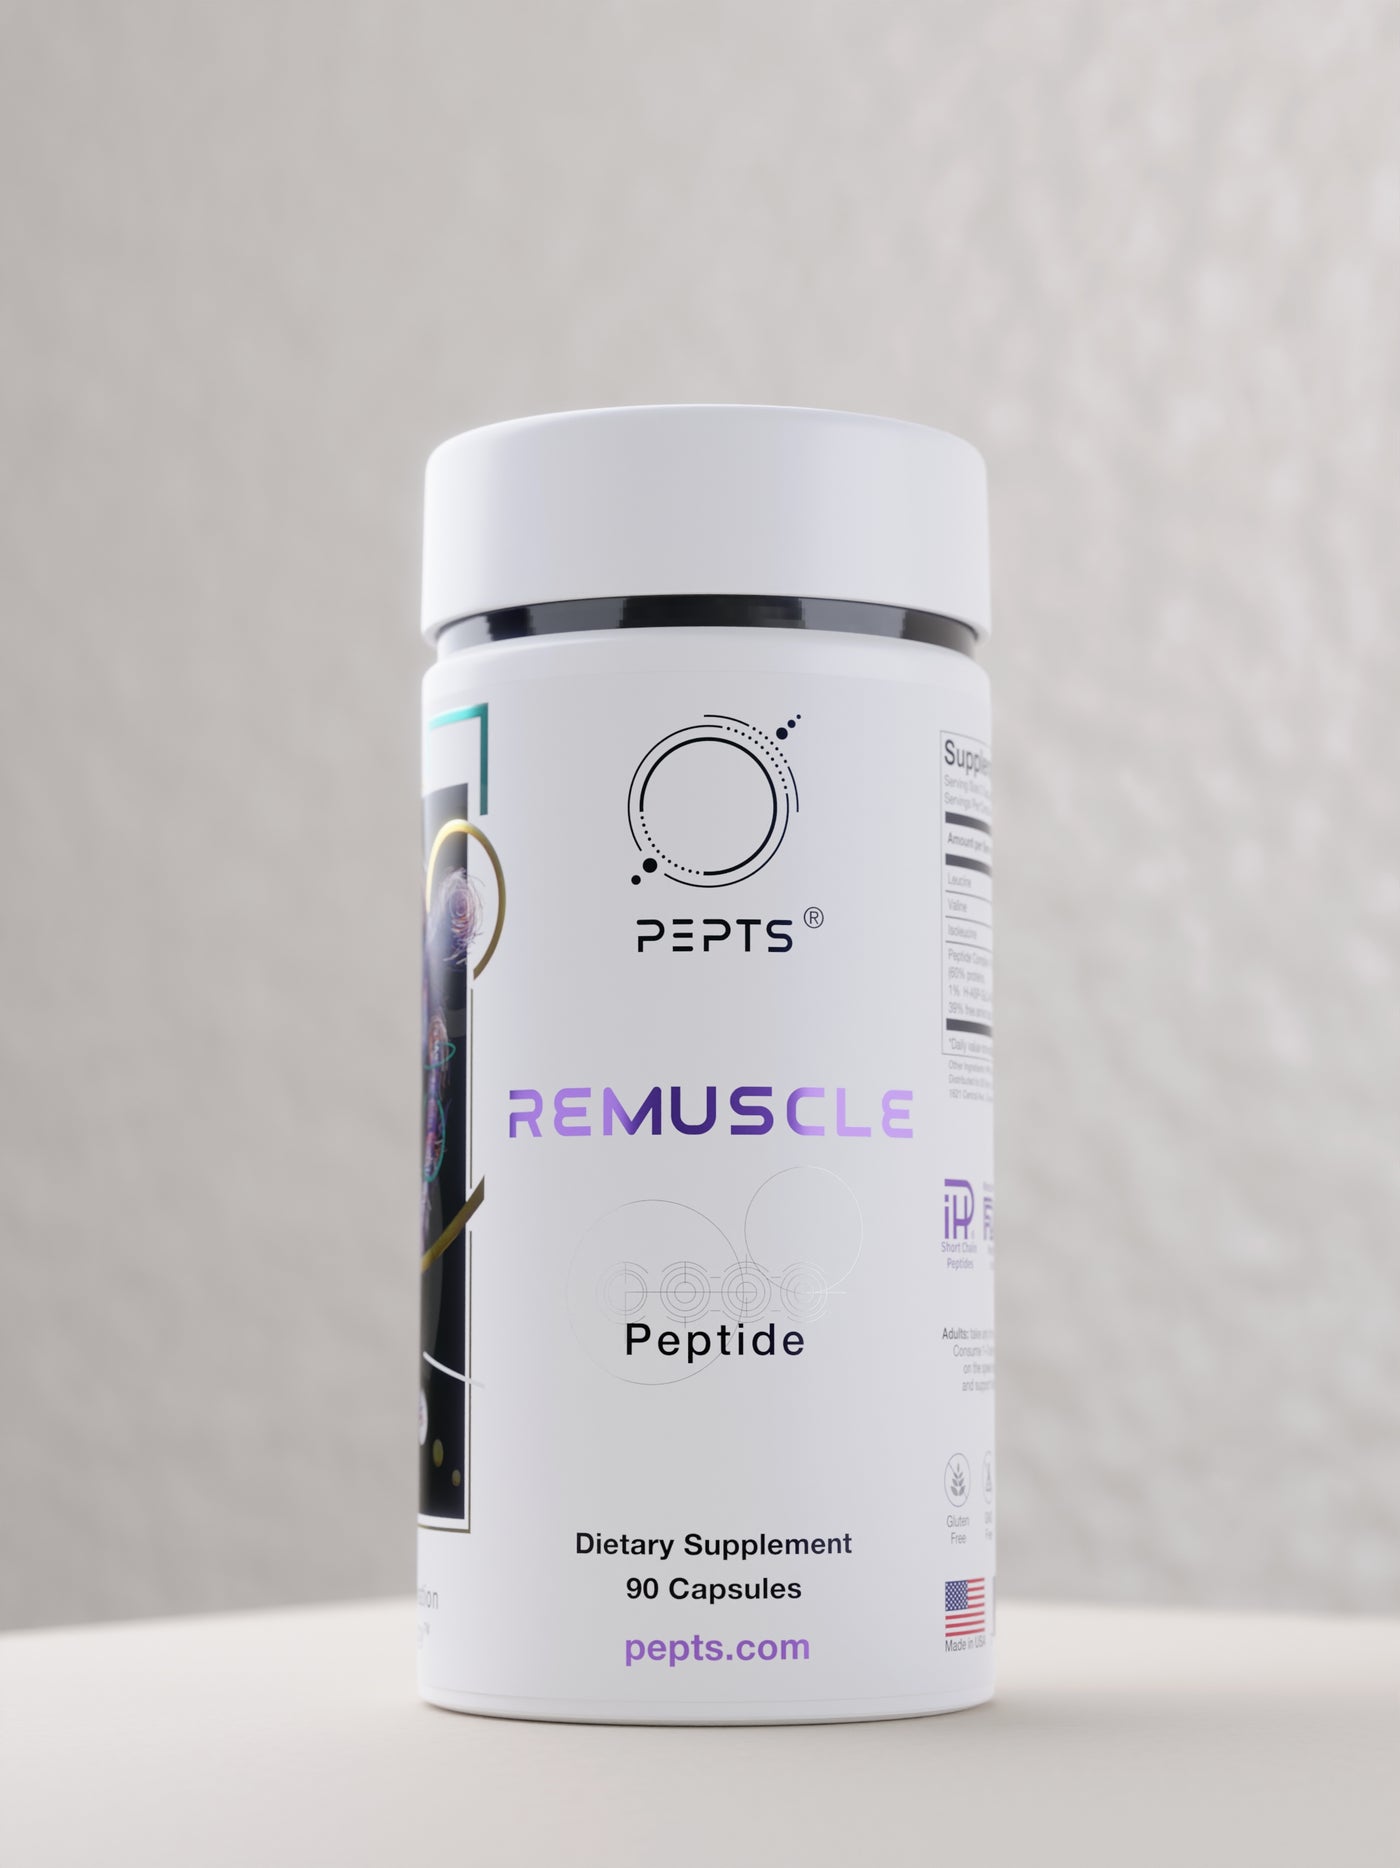 Pepts ReMuscle, Short-chain Targeted Peptide, 90 caps